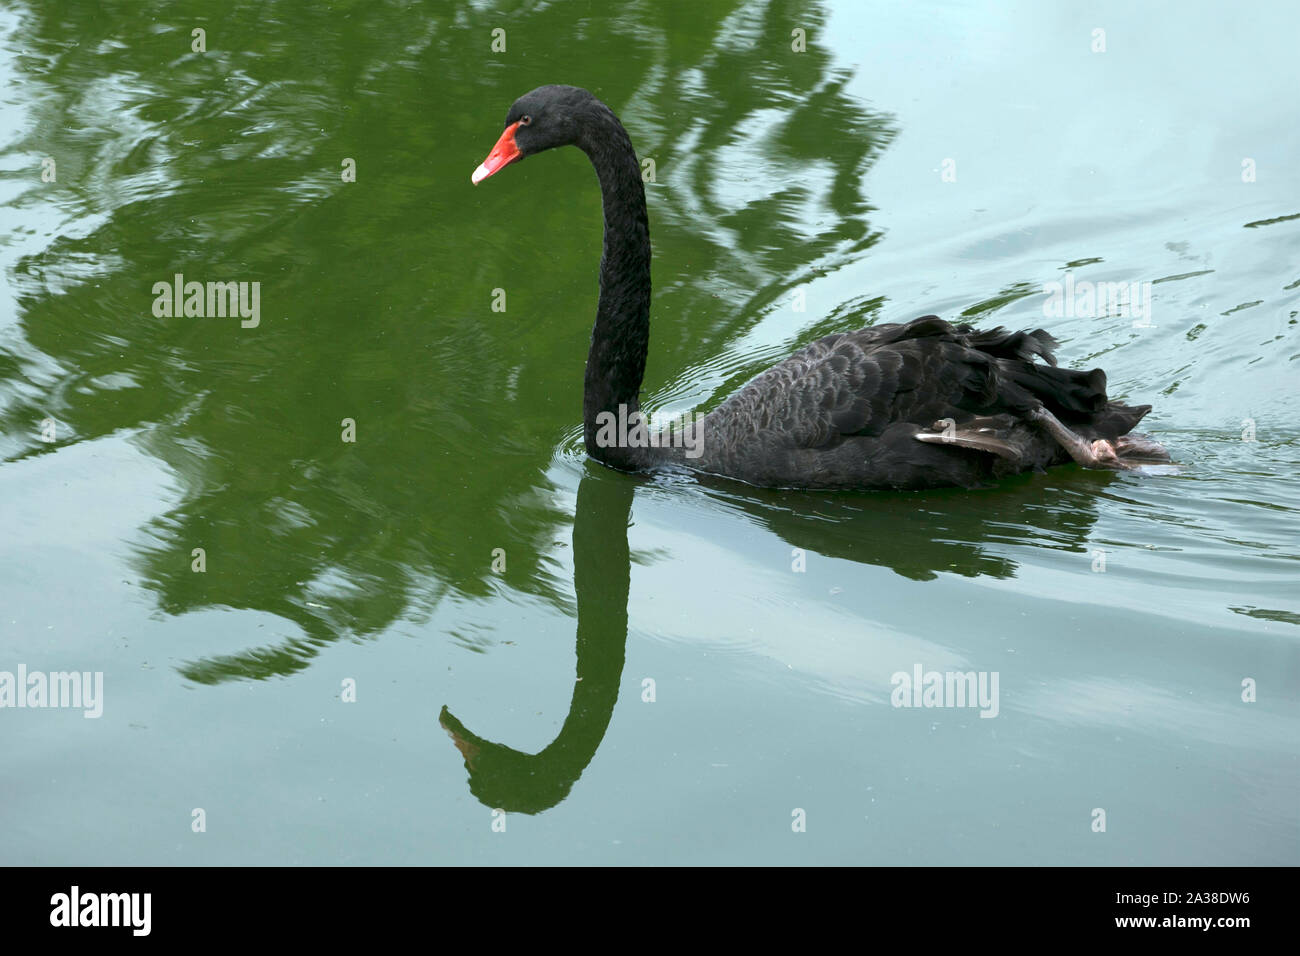 Black swan swimming in a river, Indonesia Stock Photo